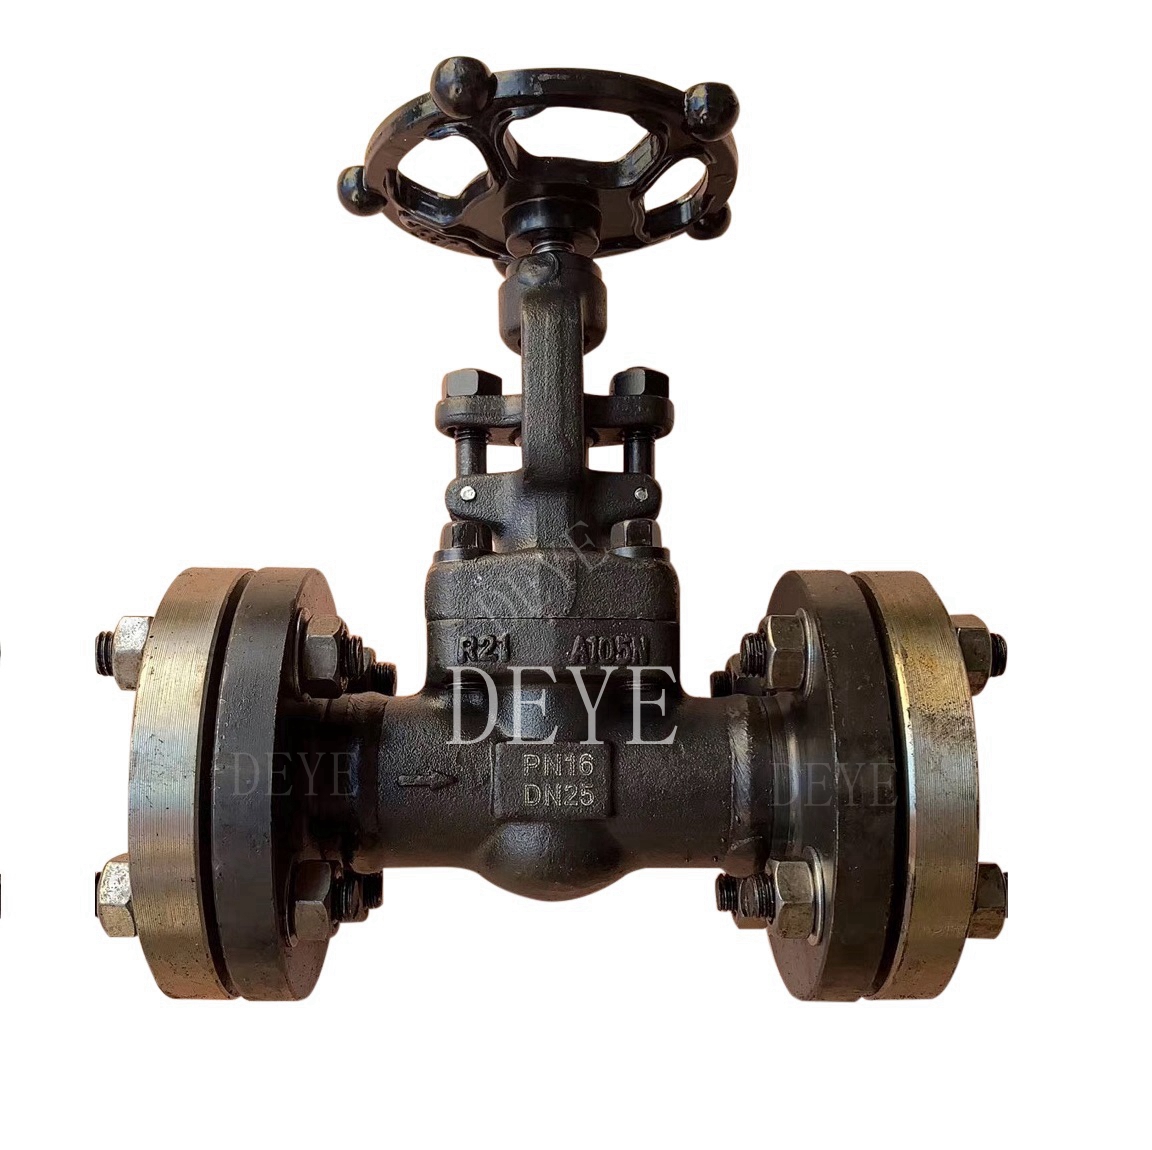 Factory Price For Ss Gate Vale -
 A105 Forged steel Gate Valve with counter flanges GVC-0016-1F – Deye